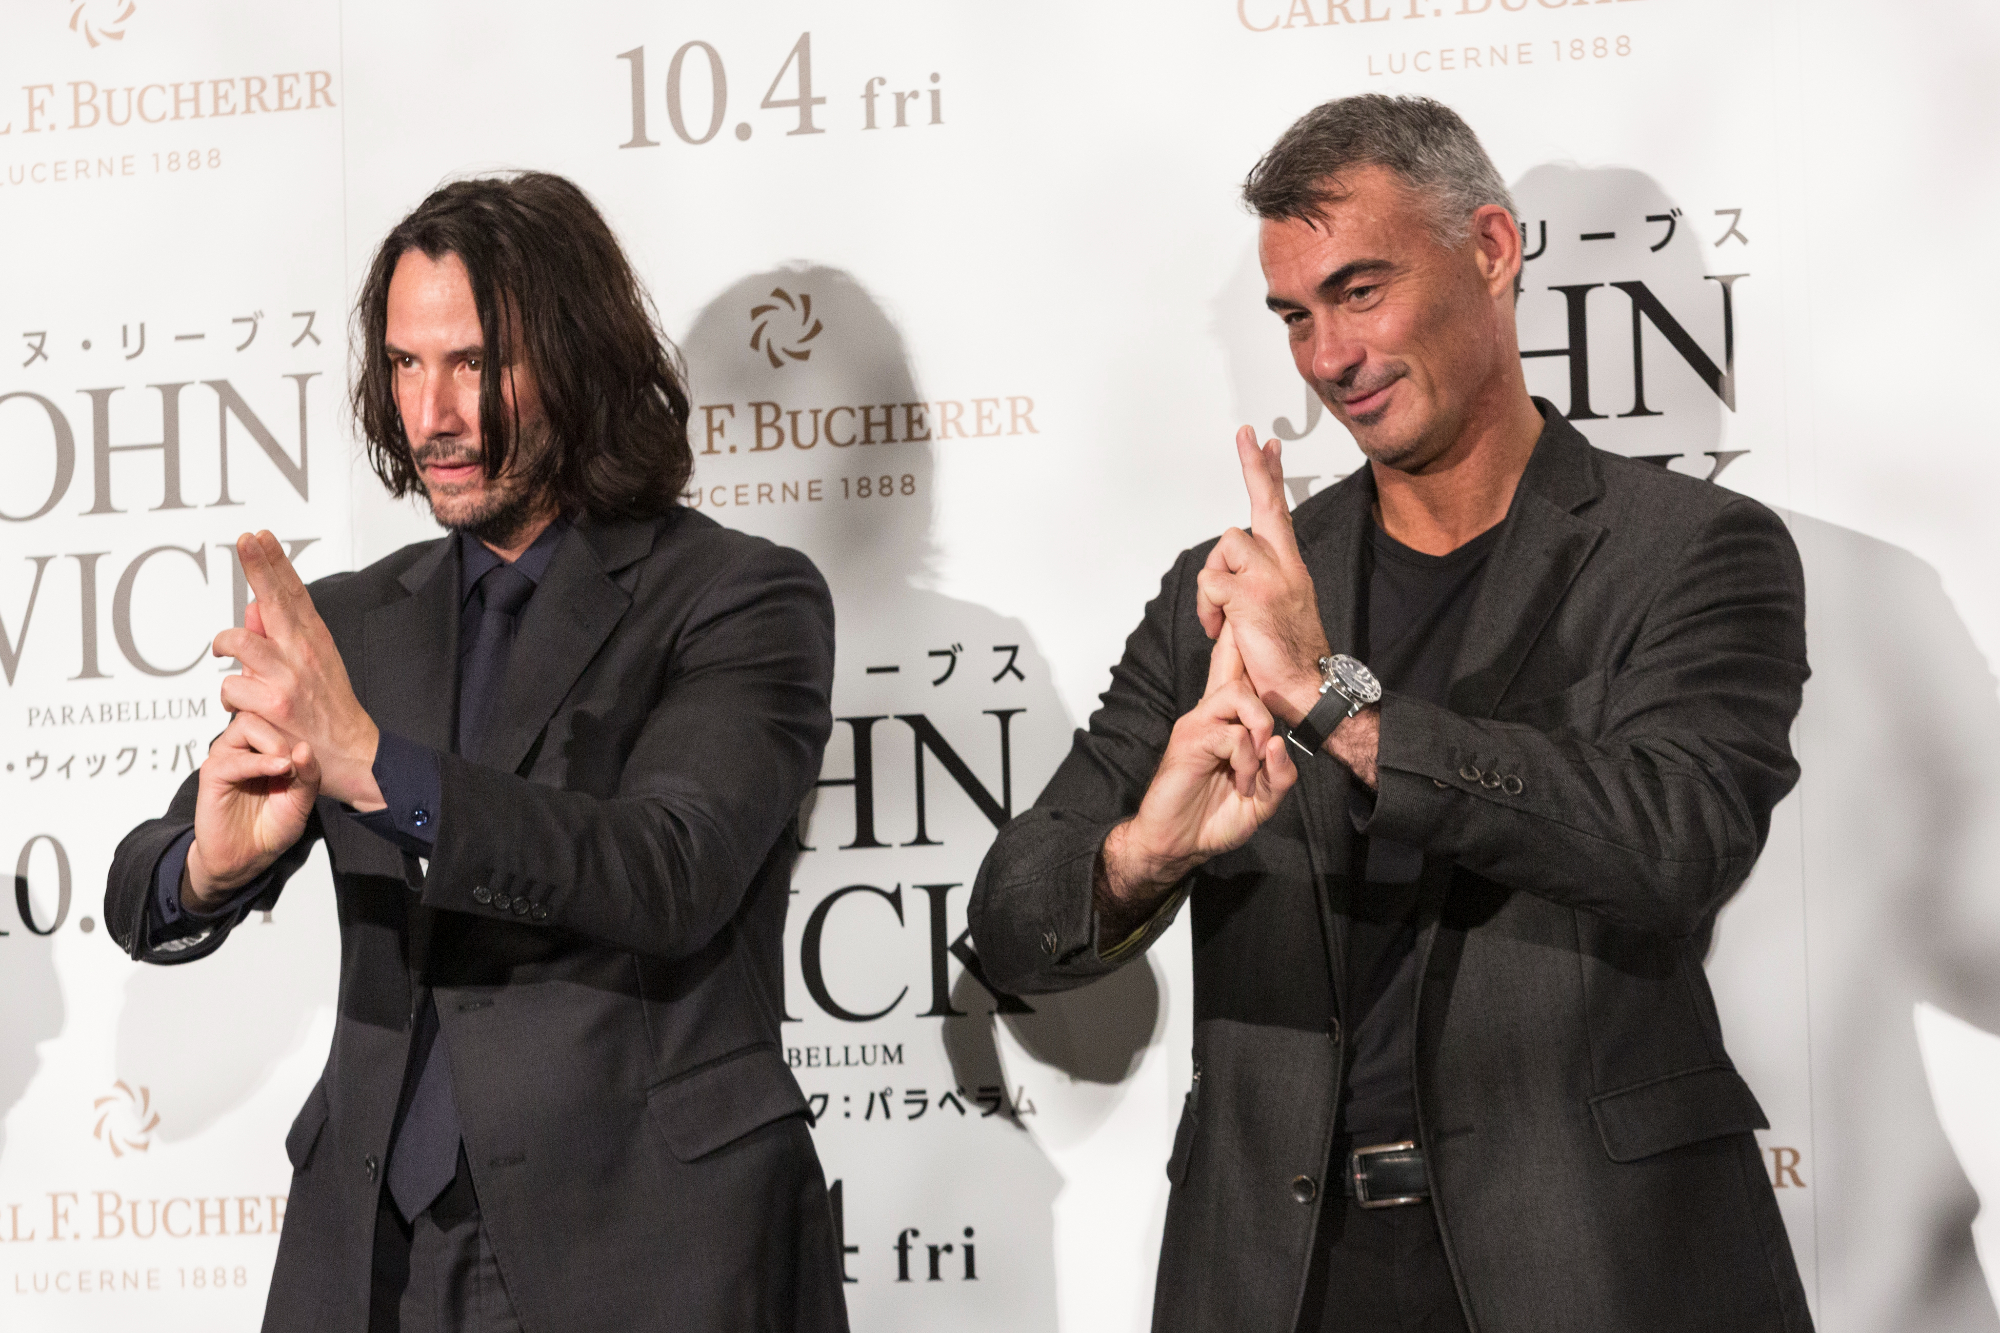 John Wick actor Keanu Reeves and Chad Stahelski